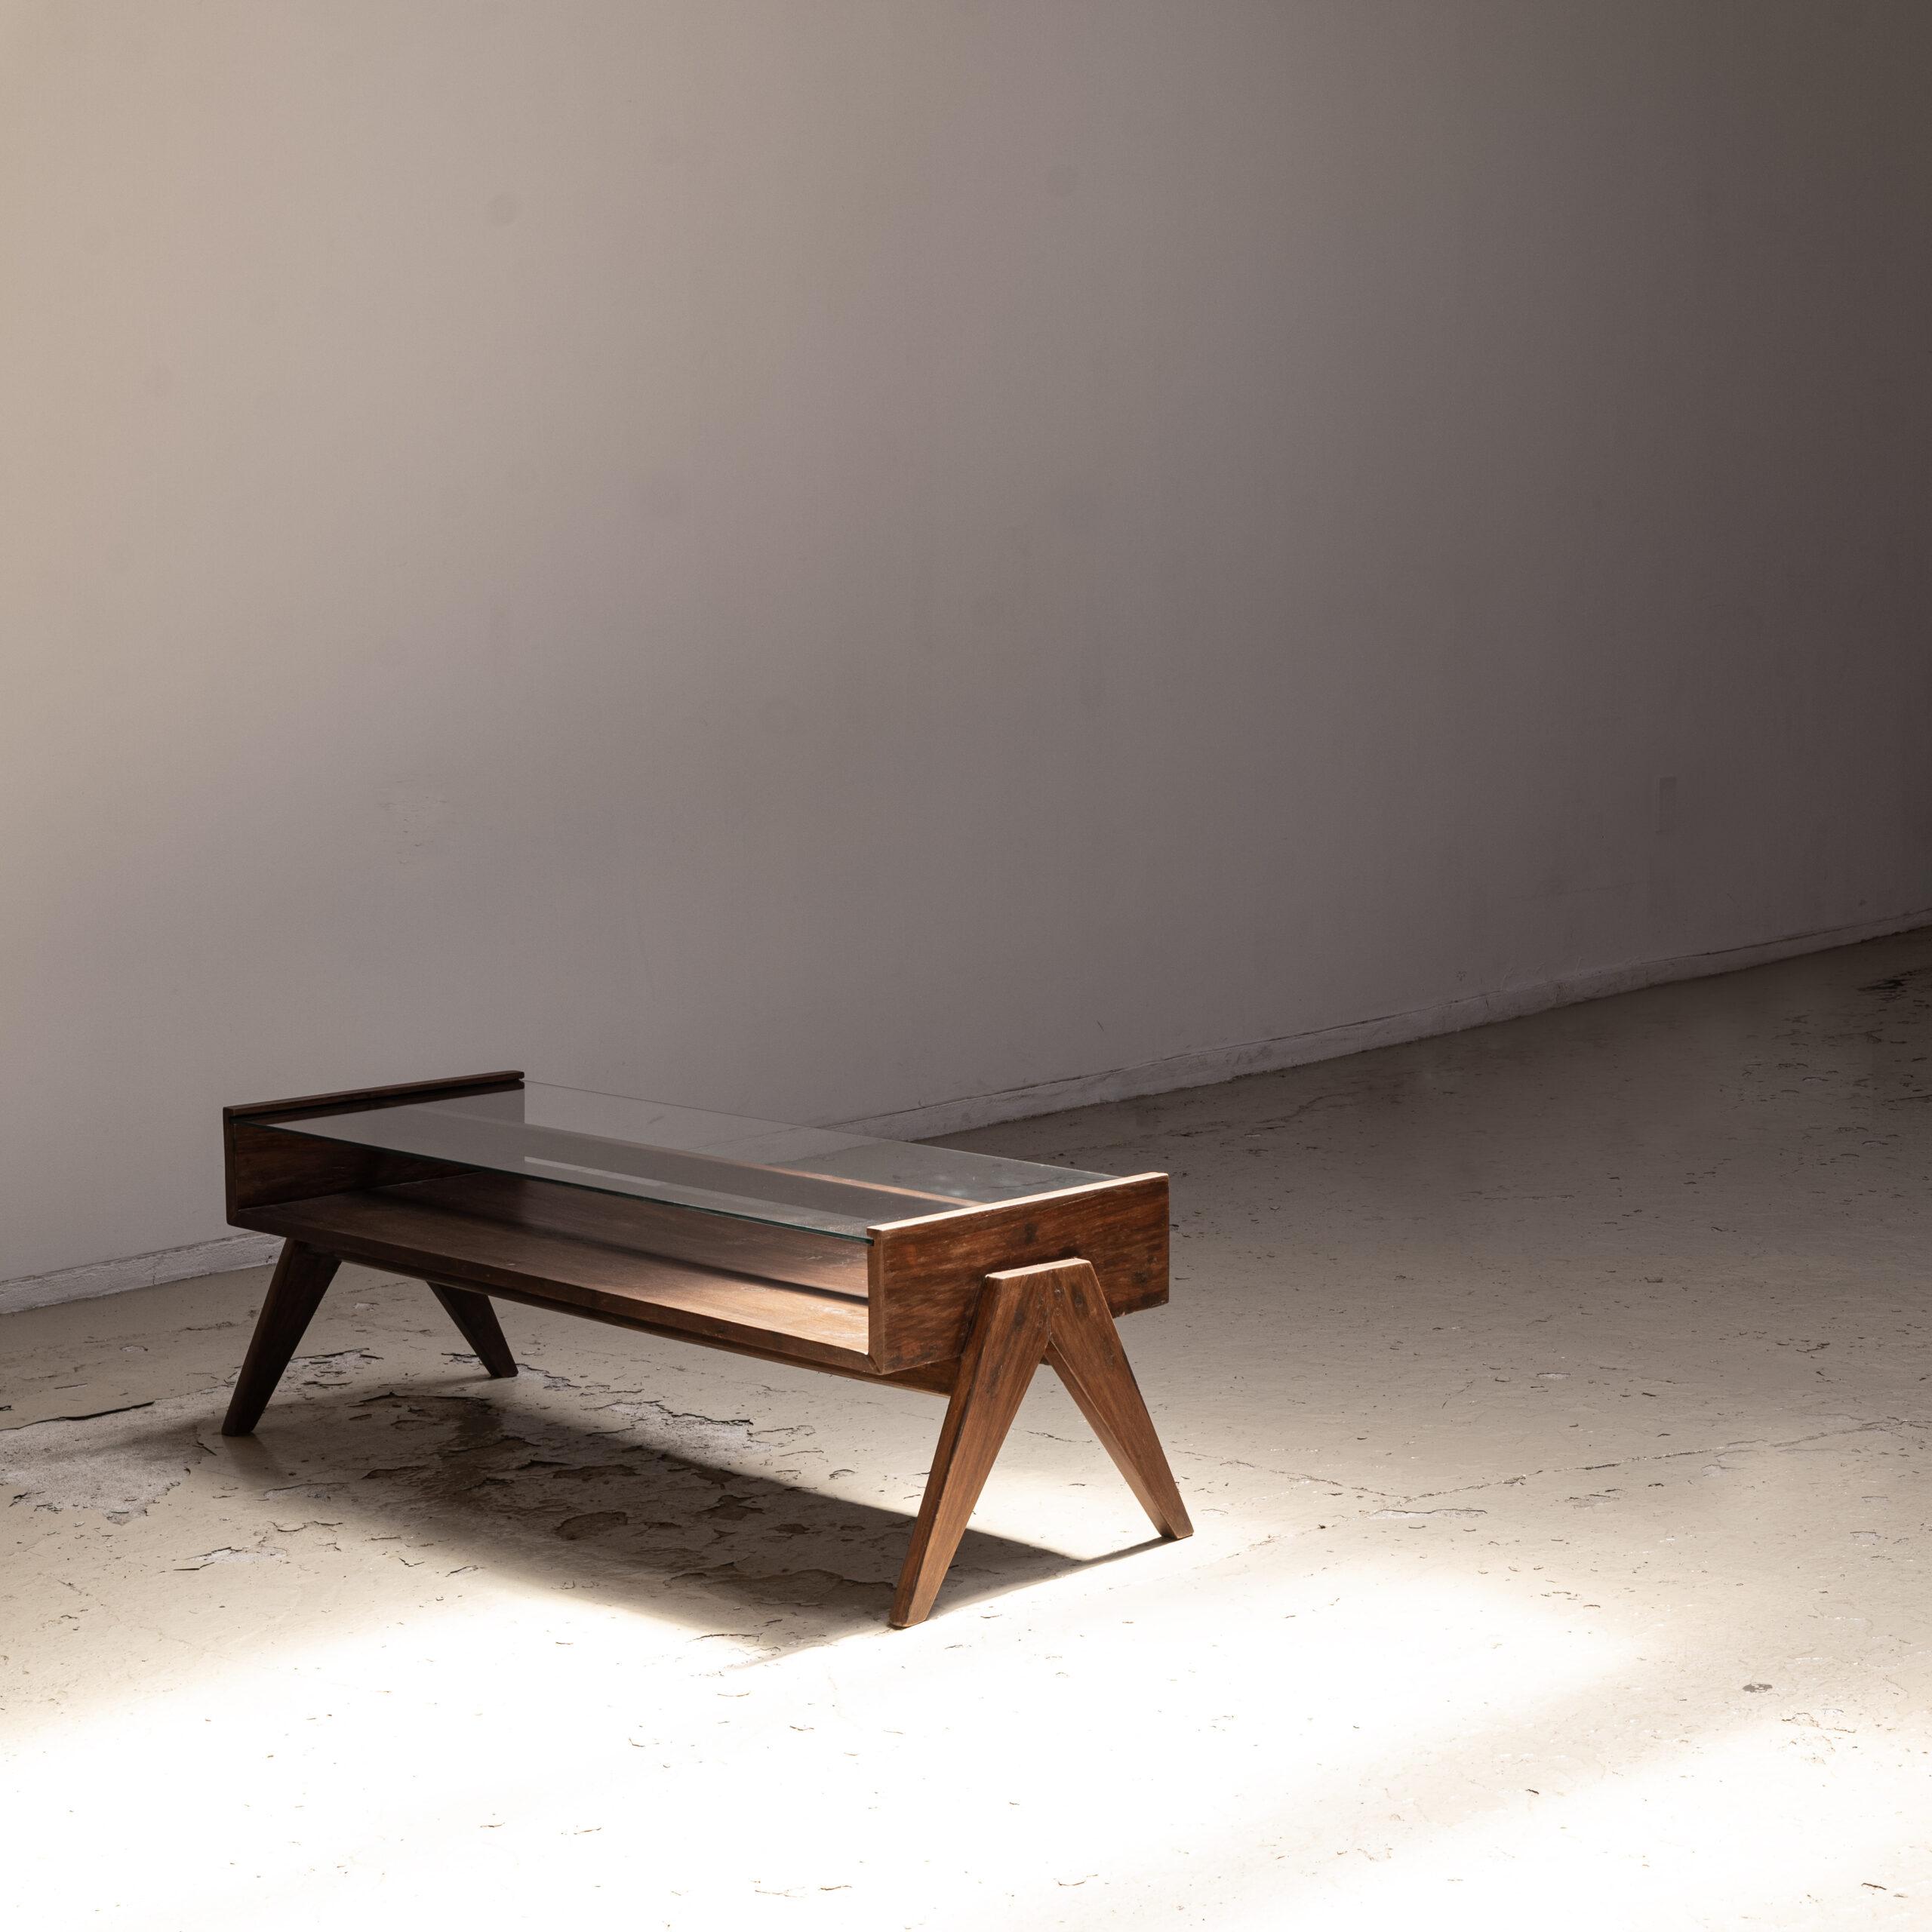 Pierre Jeanneret
coffee table
glass table,ピエール ジャンヌレ